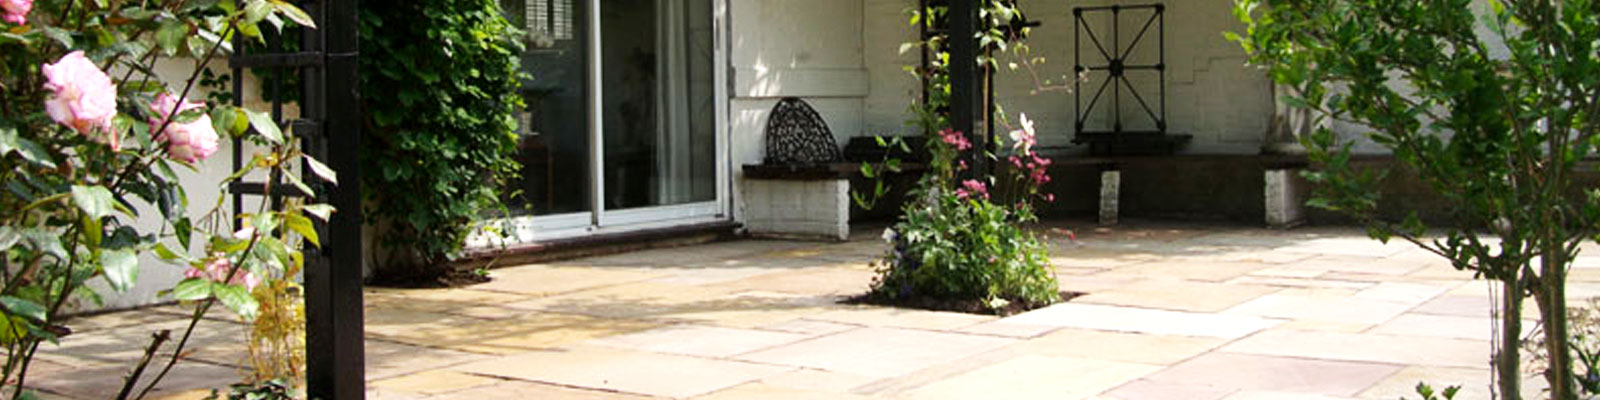 Landscaping and Paving